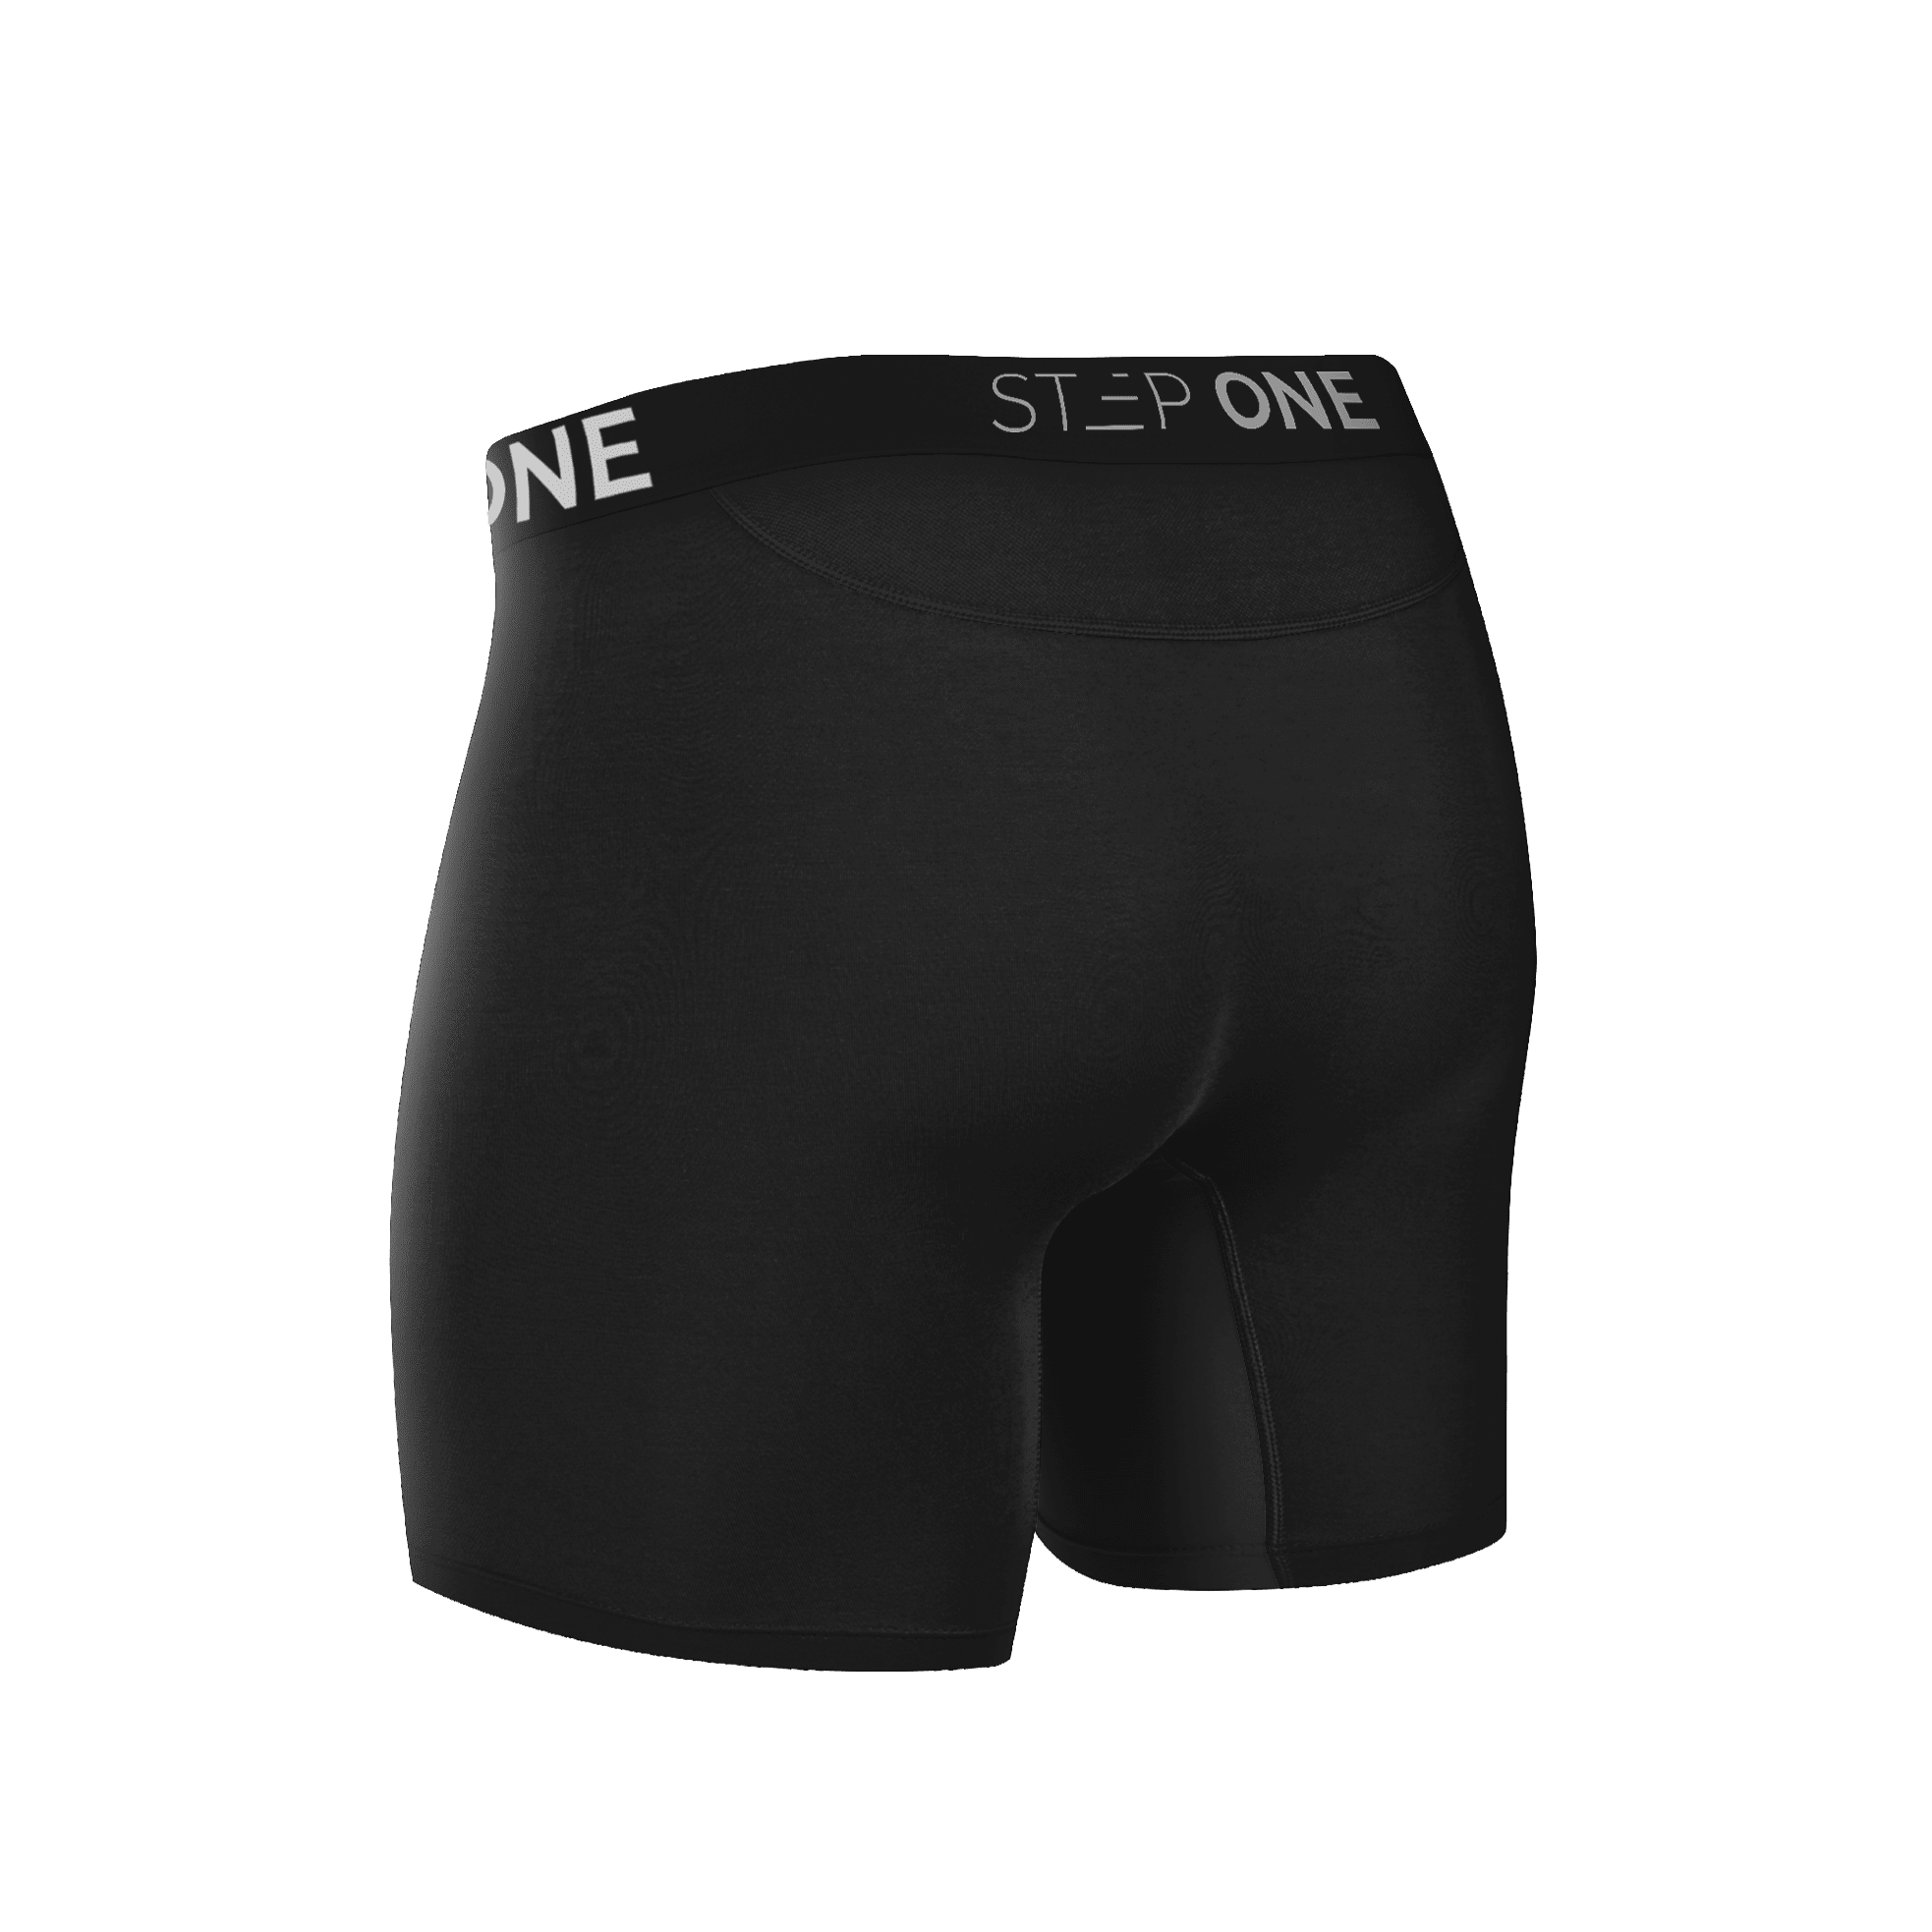 Super Soft Boxer Briefs - Anti-Chafe & No Ride Up Design - Two Pack With &  Without Pouch - Black, JustWears